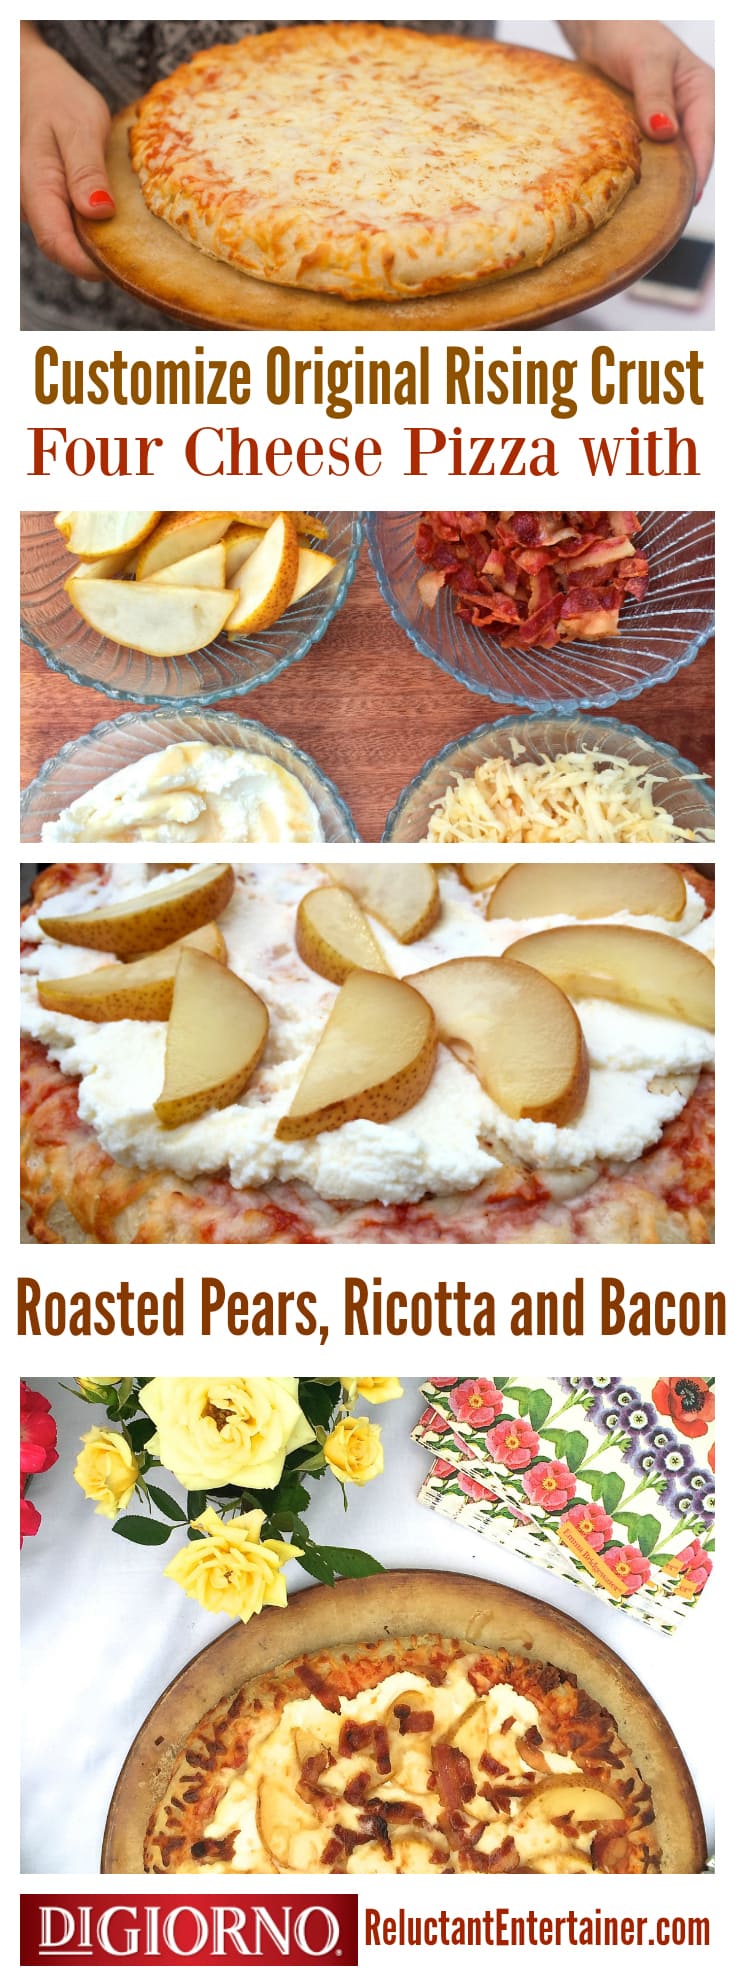 Today I'm sharing how to customize your own DIGIORNO pizza for a weekend gathering, with ricotta and pears, for a Roasted Pear Ricotta Pizza!